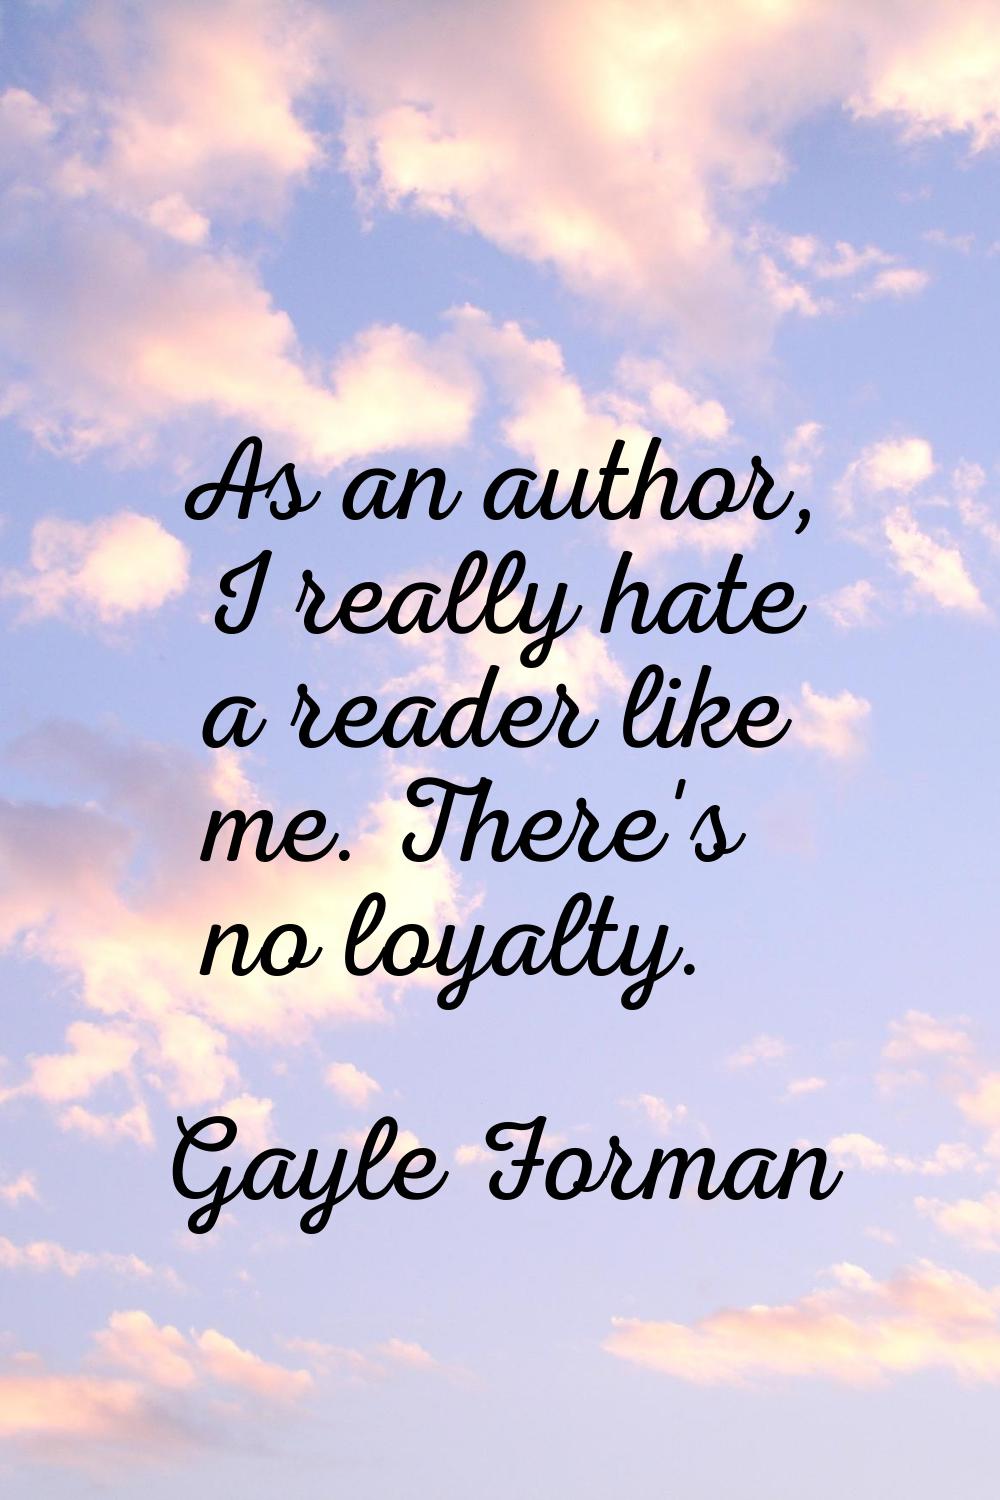 As an author, I really hate a reader like me. There's no loyalty.